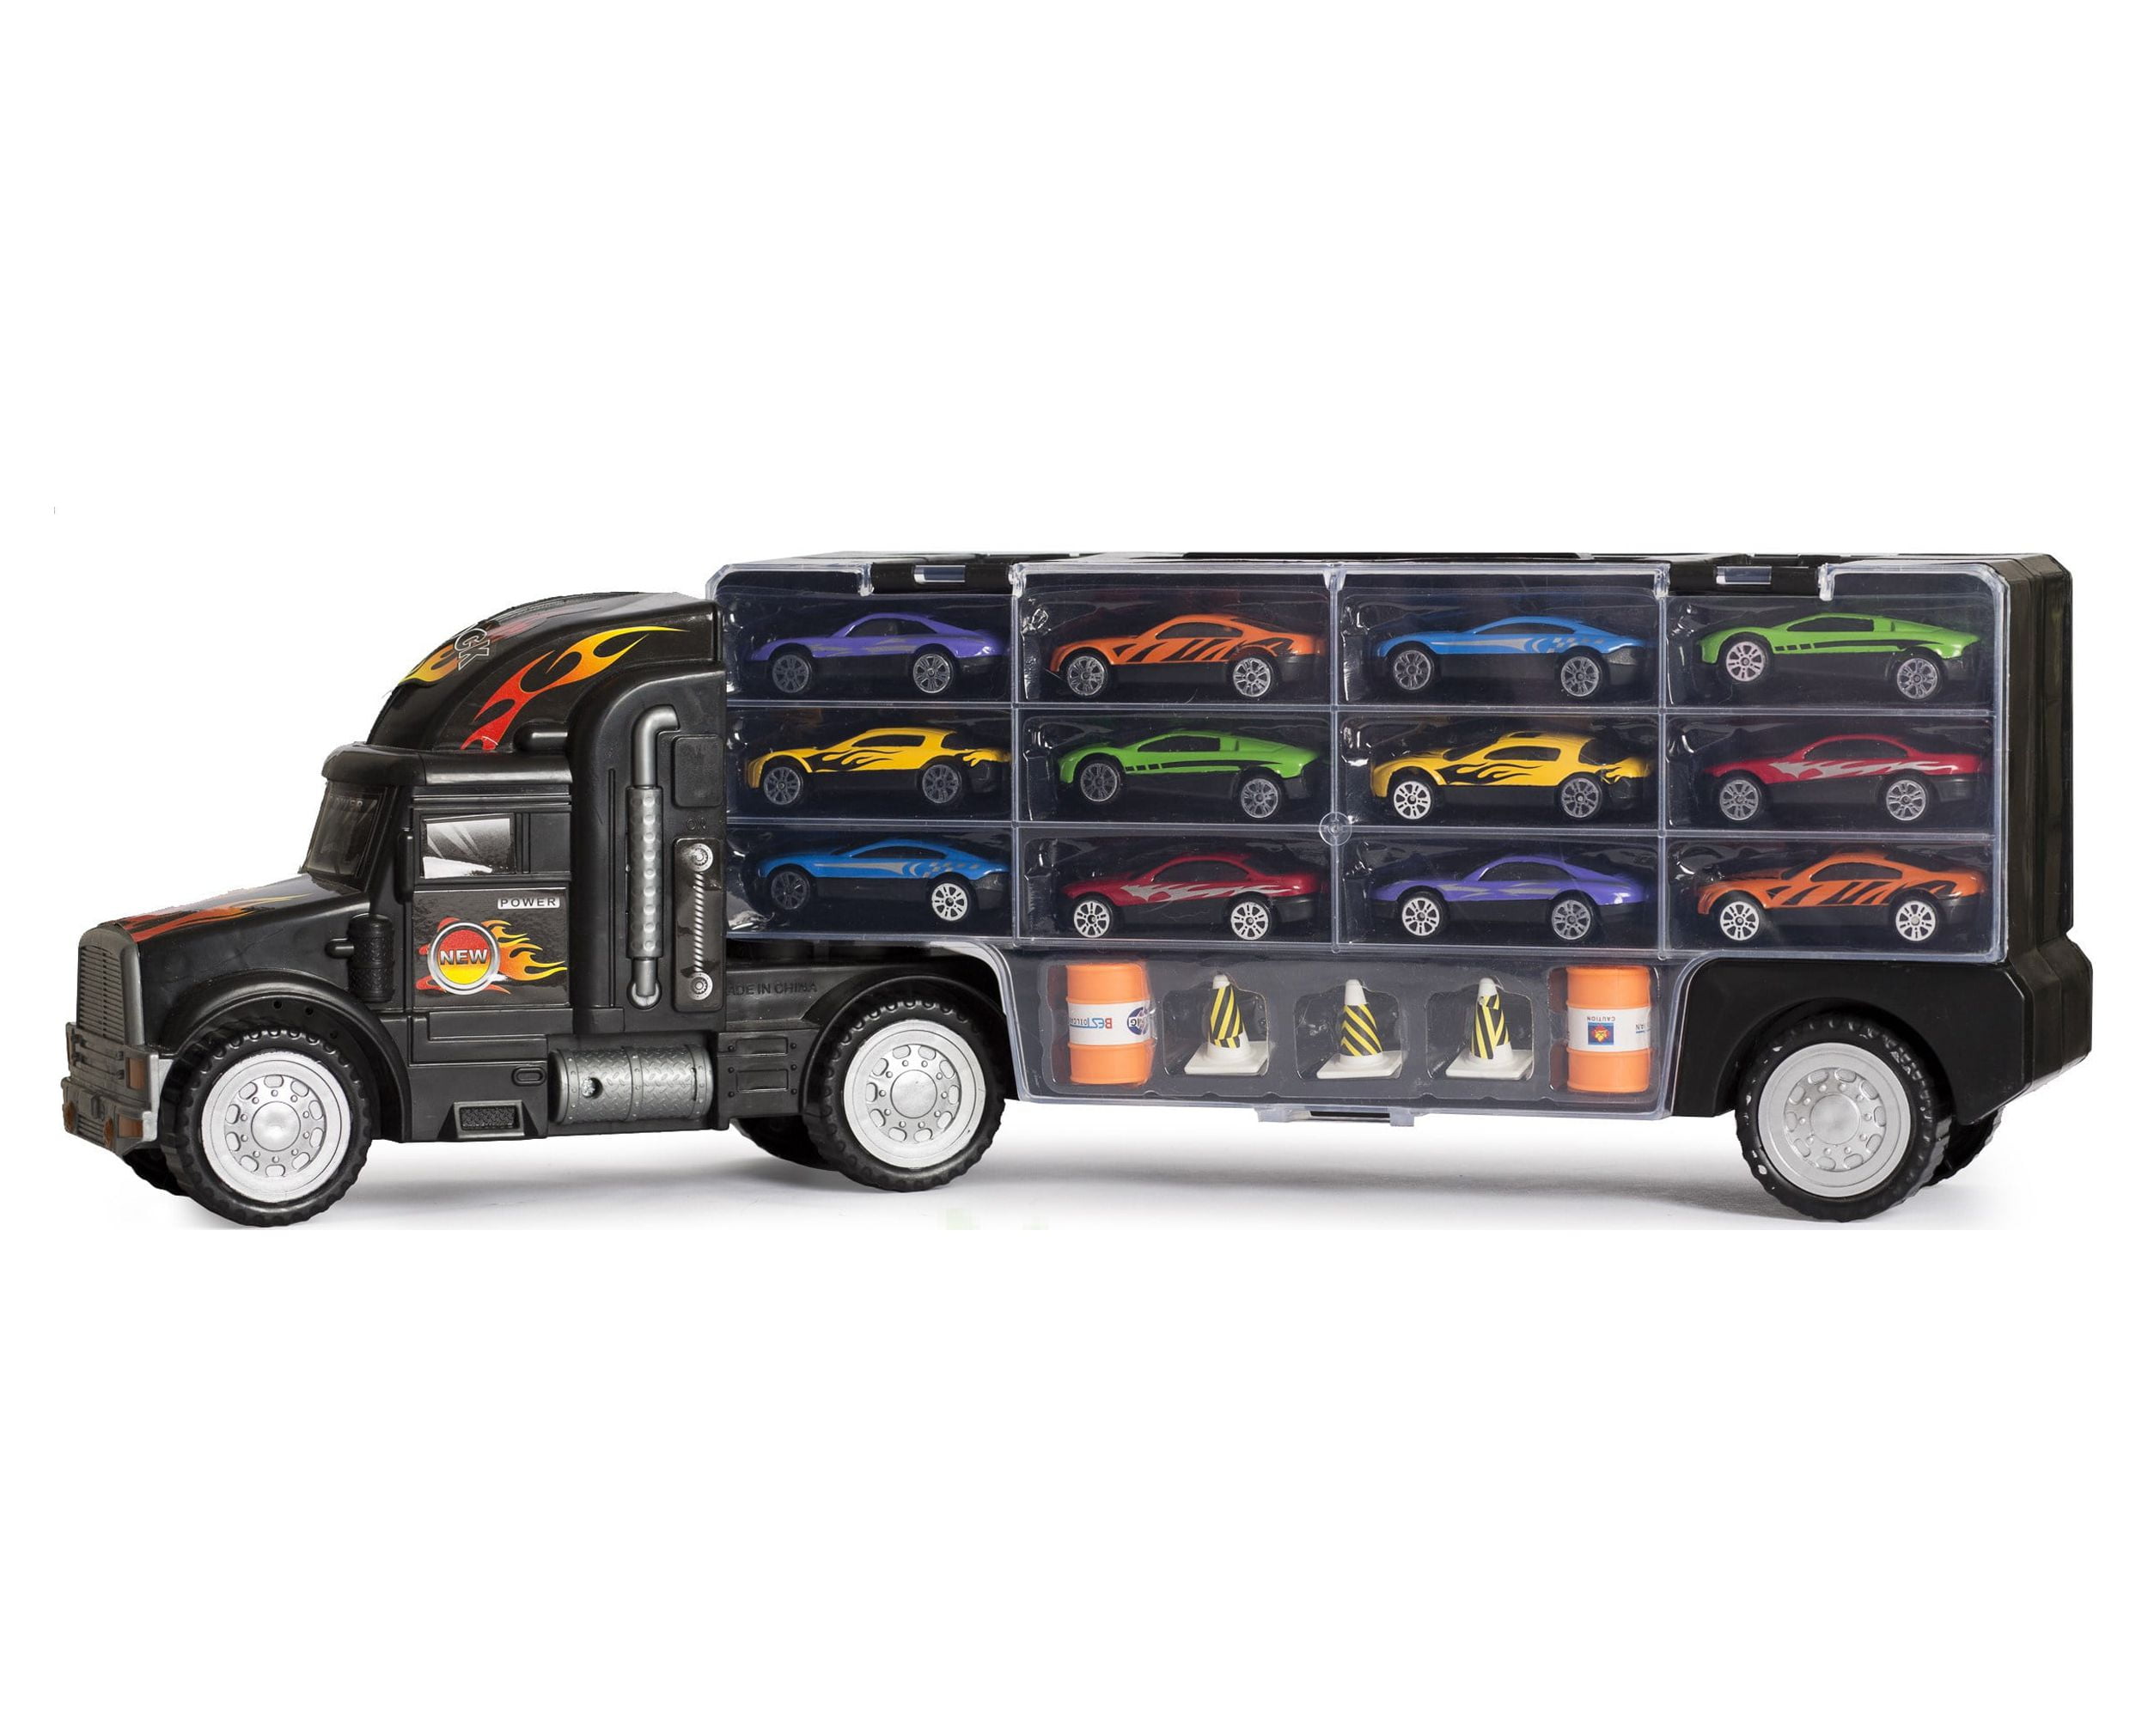 Big-Daddy Tractor Trailer Car Collection Case Carrier Transport Toy Truck  For Kids Includes 12 Cars + Accessories 